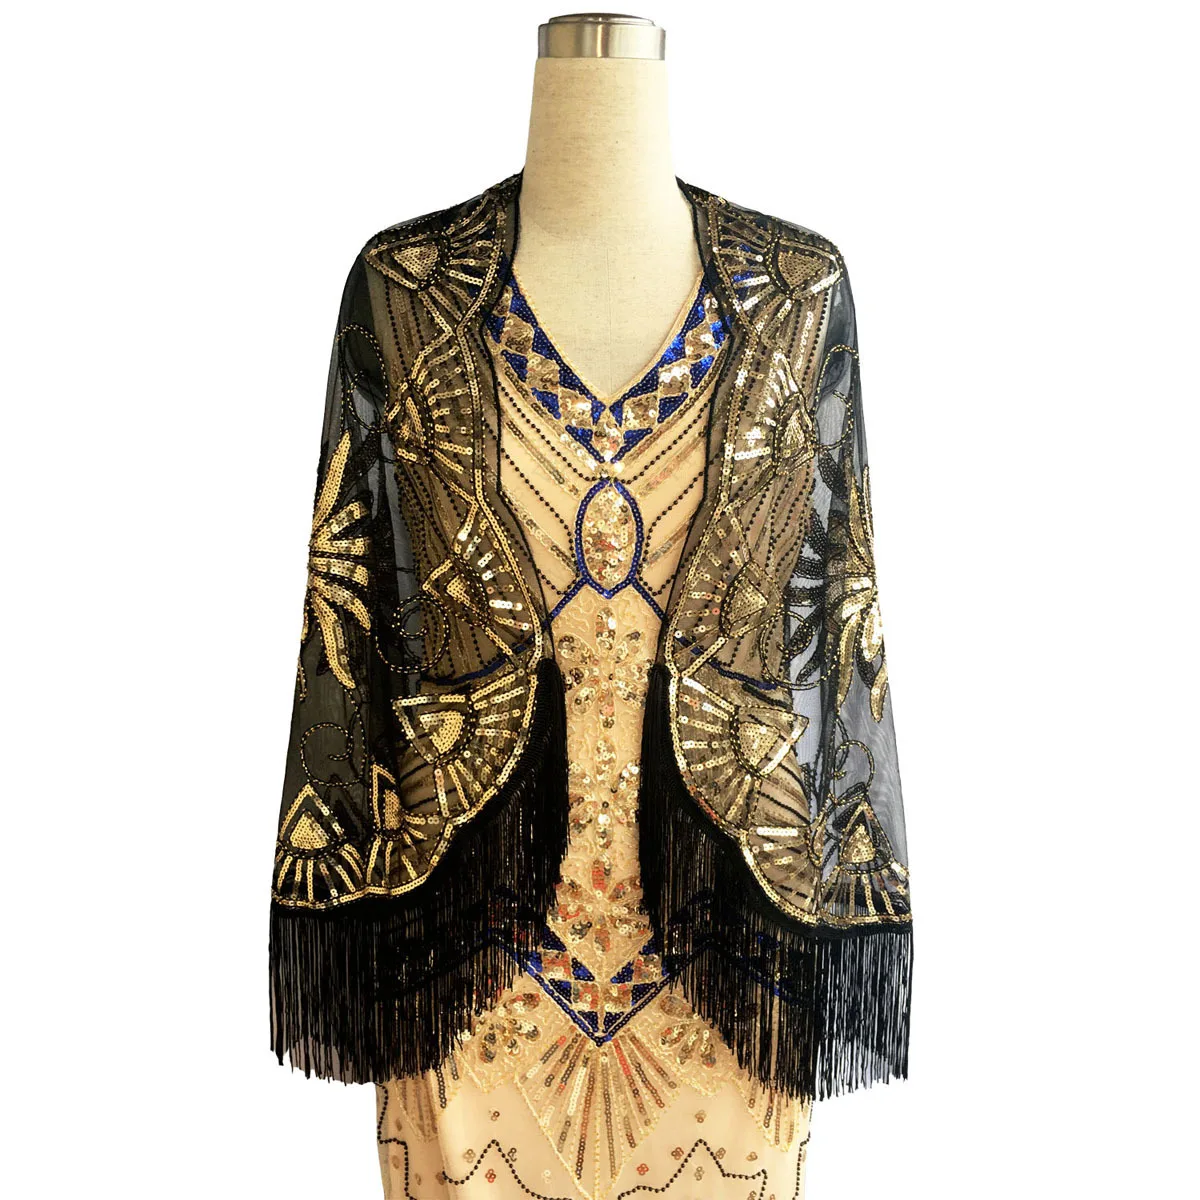 

1920s Sequin Beaded Floral Shawl Wraps Fringed Evening Cape Scarf for Wedding Prom Party